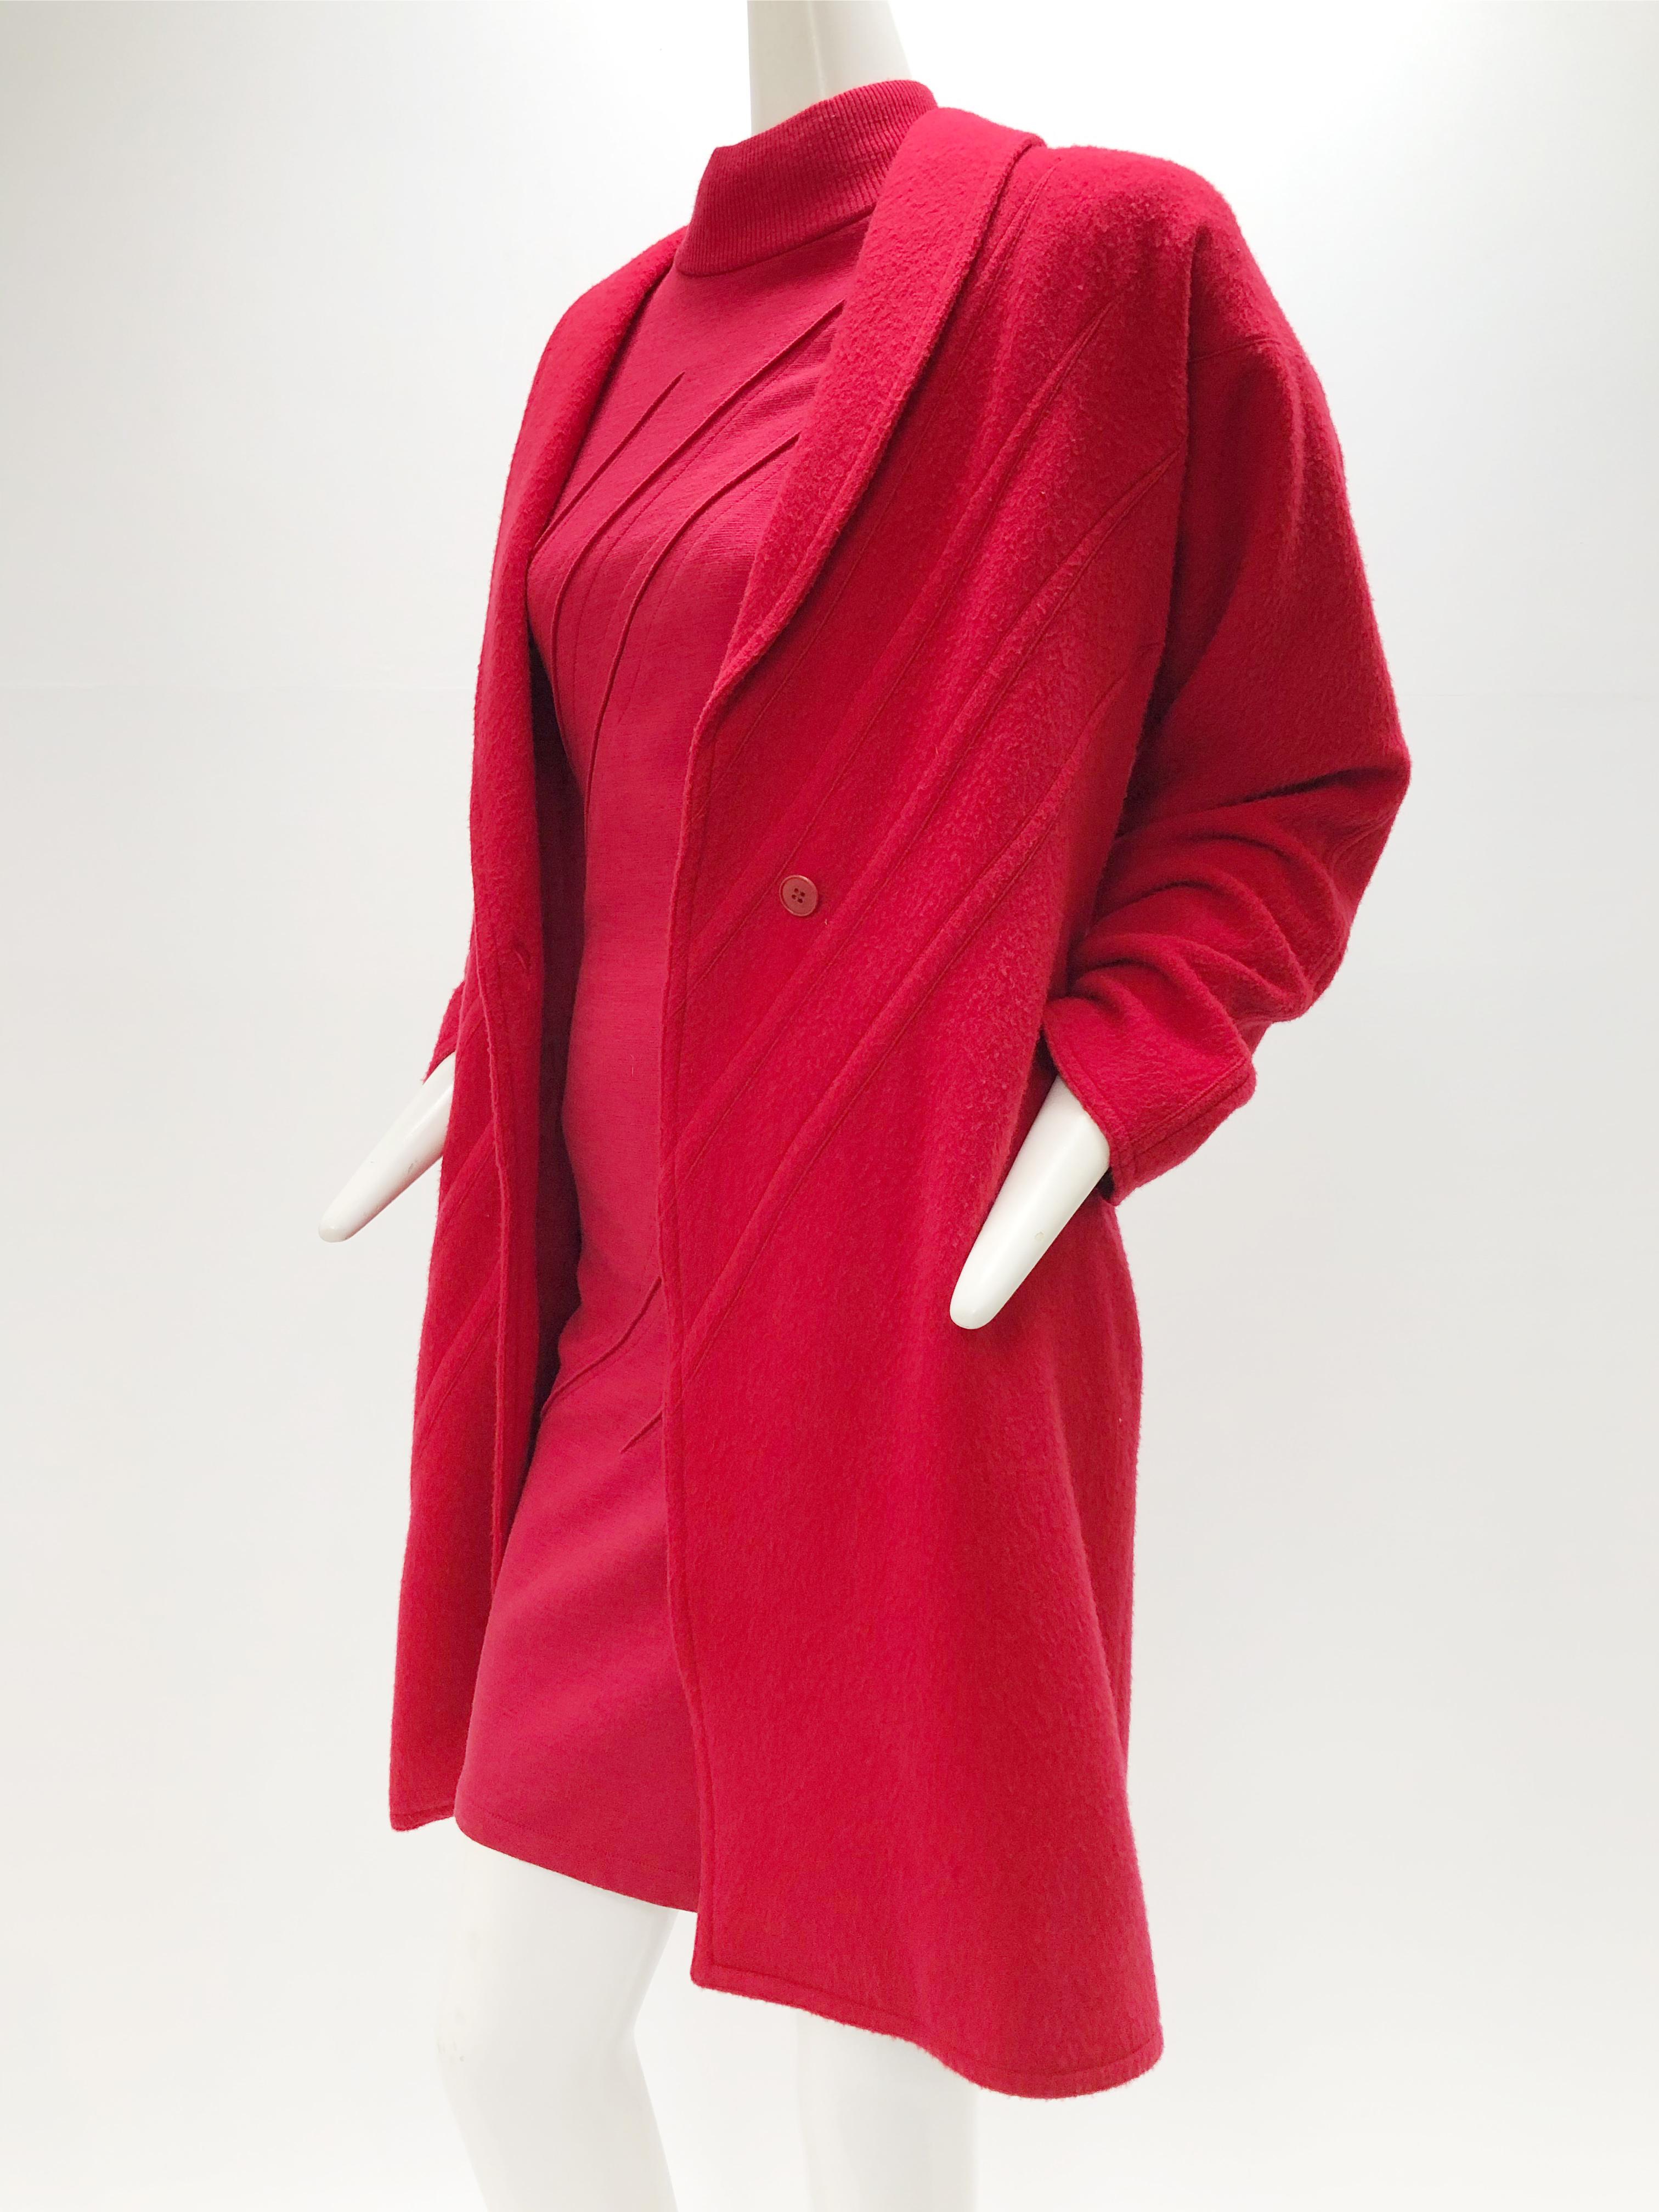 1980s Gianni Versace Primary Red Wool Coat w Angular Trapunto Stitching Details In Excellent Condition For Sale In Gresham, OR